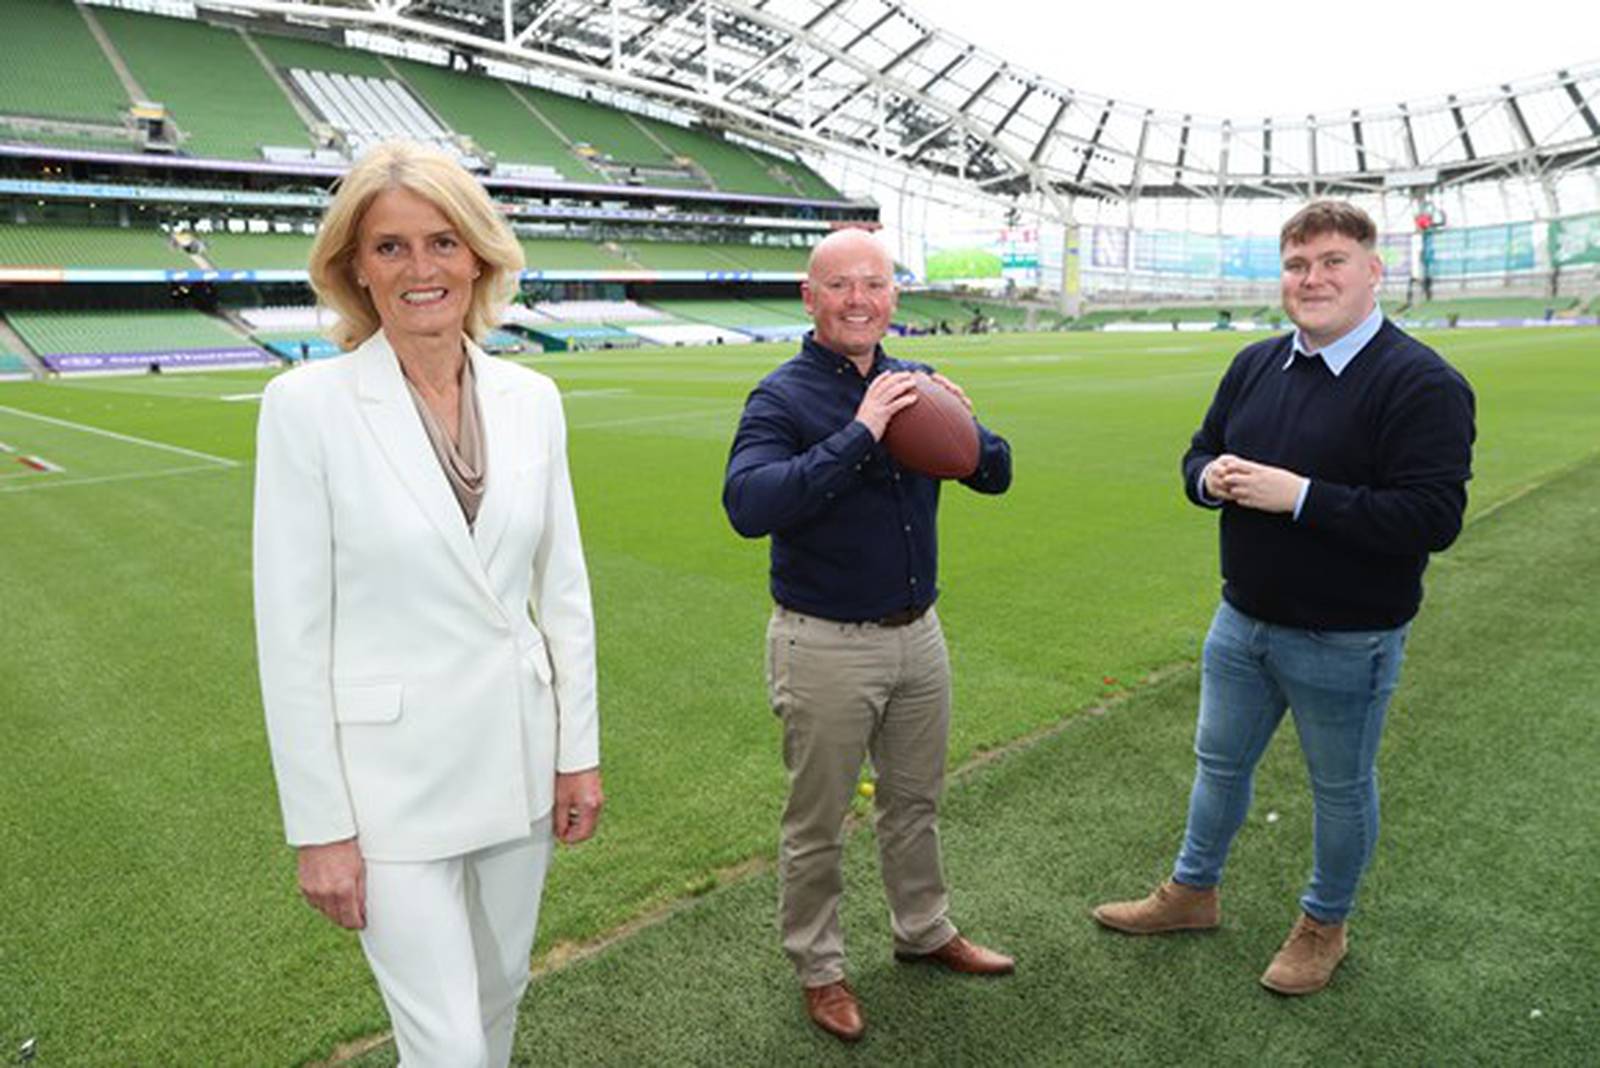 Mary Buckley, Executive Director IDA Ireland, with Barry O’Connell, Global Training Manager, PFF and Liam Jones, Global Training Specialist, PFF at the Aviva Stadium ahead of last Saturday’s Aer Lingus Classic between Northwestern Wildcats and the Nebraska Cornhuskers